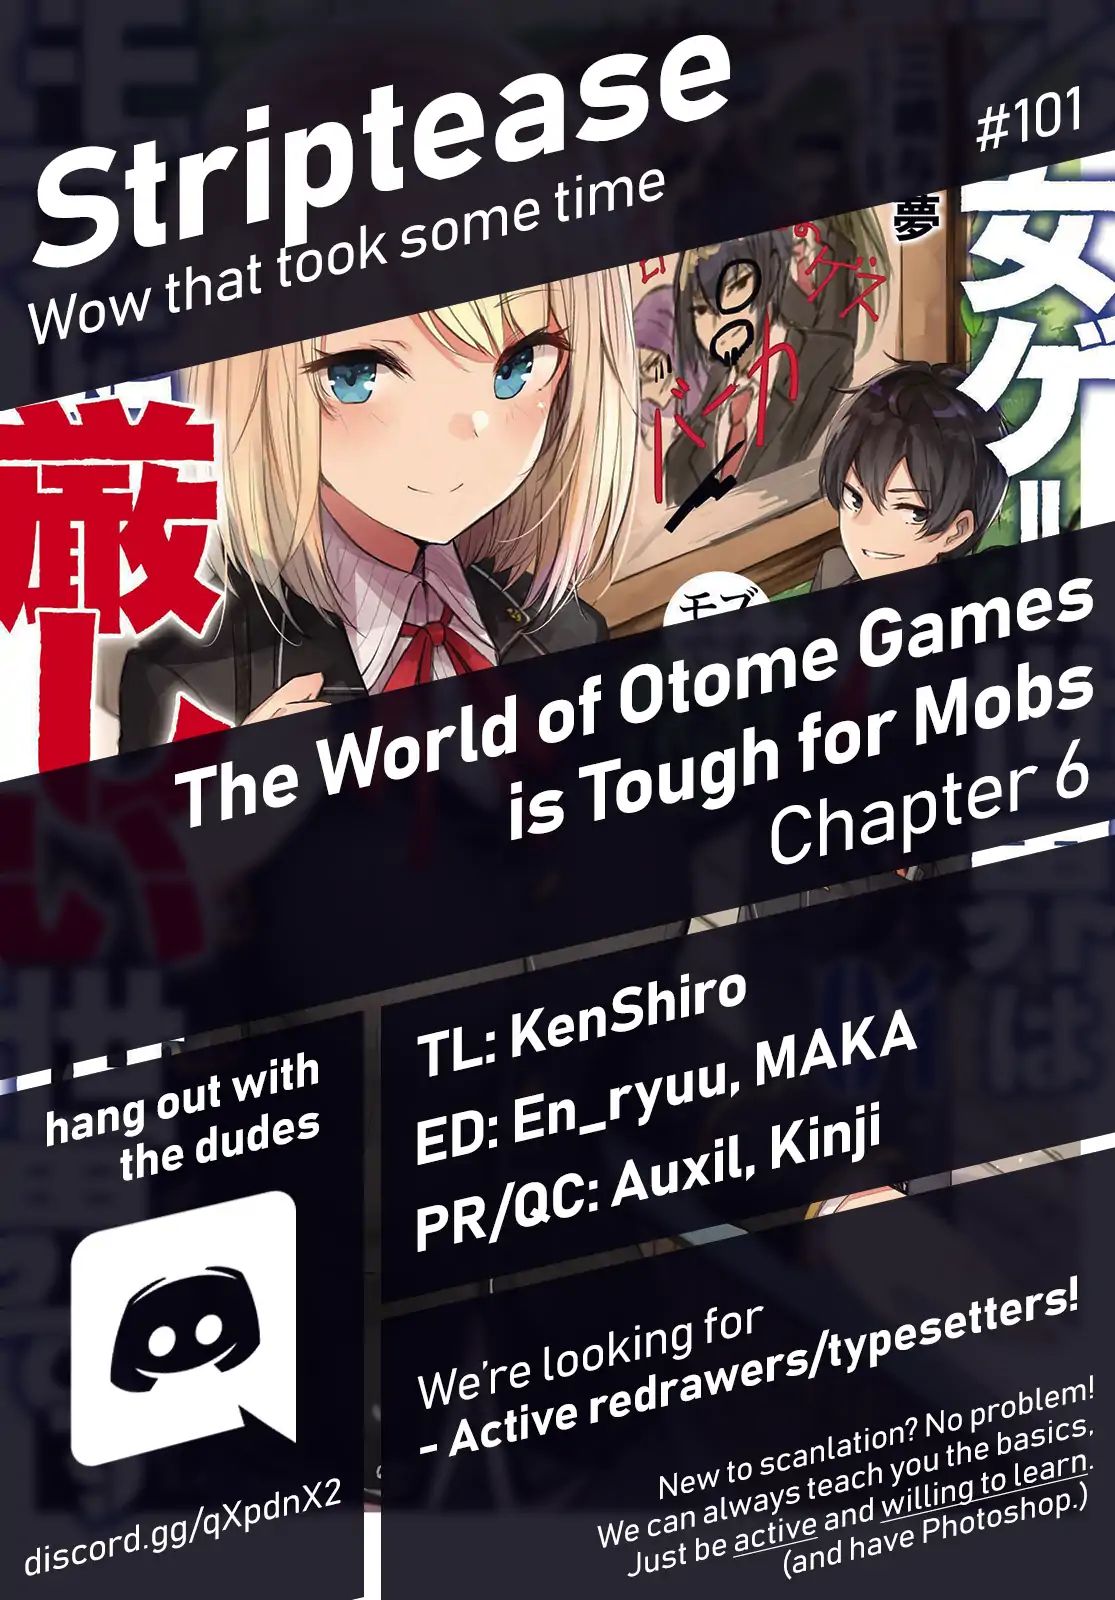 The World of Otome Games is Tough for Mobs Chapter 6: Power